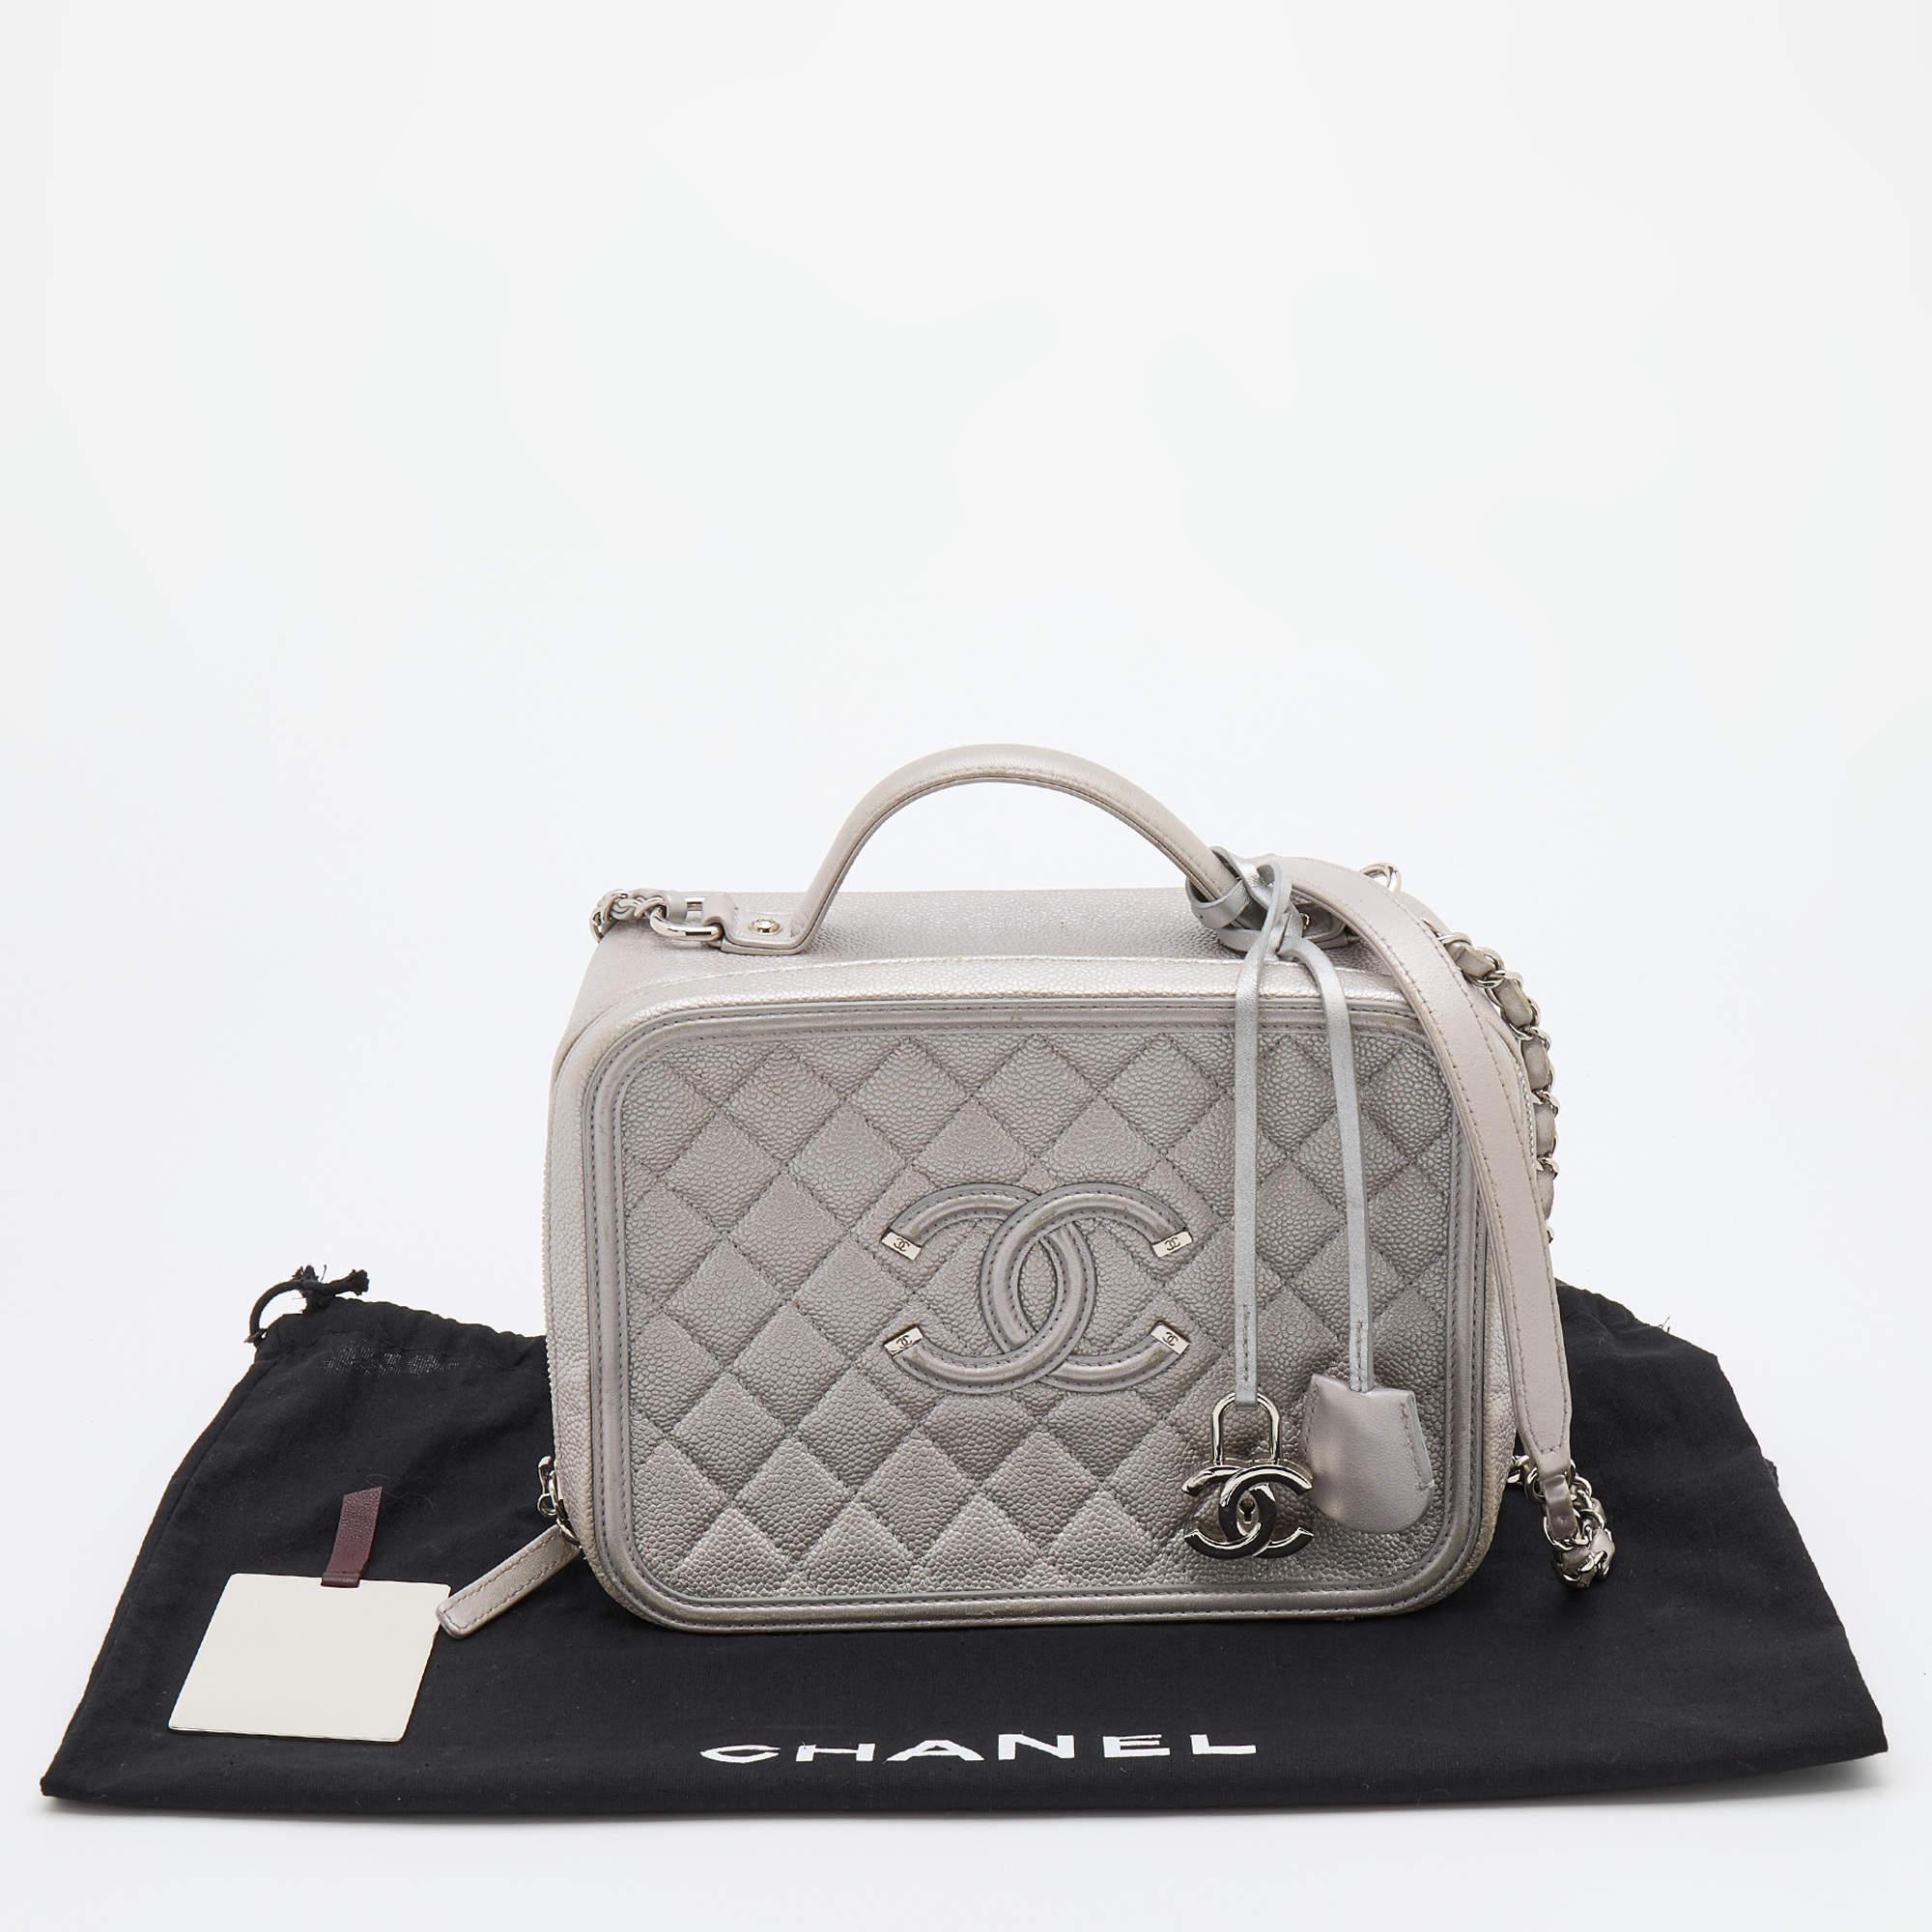 Chanel Silver Quilted Caviar Leather Large Filigree Vanity Bag 9